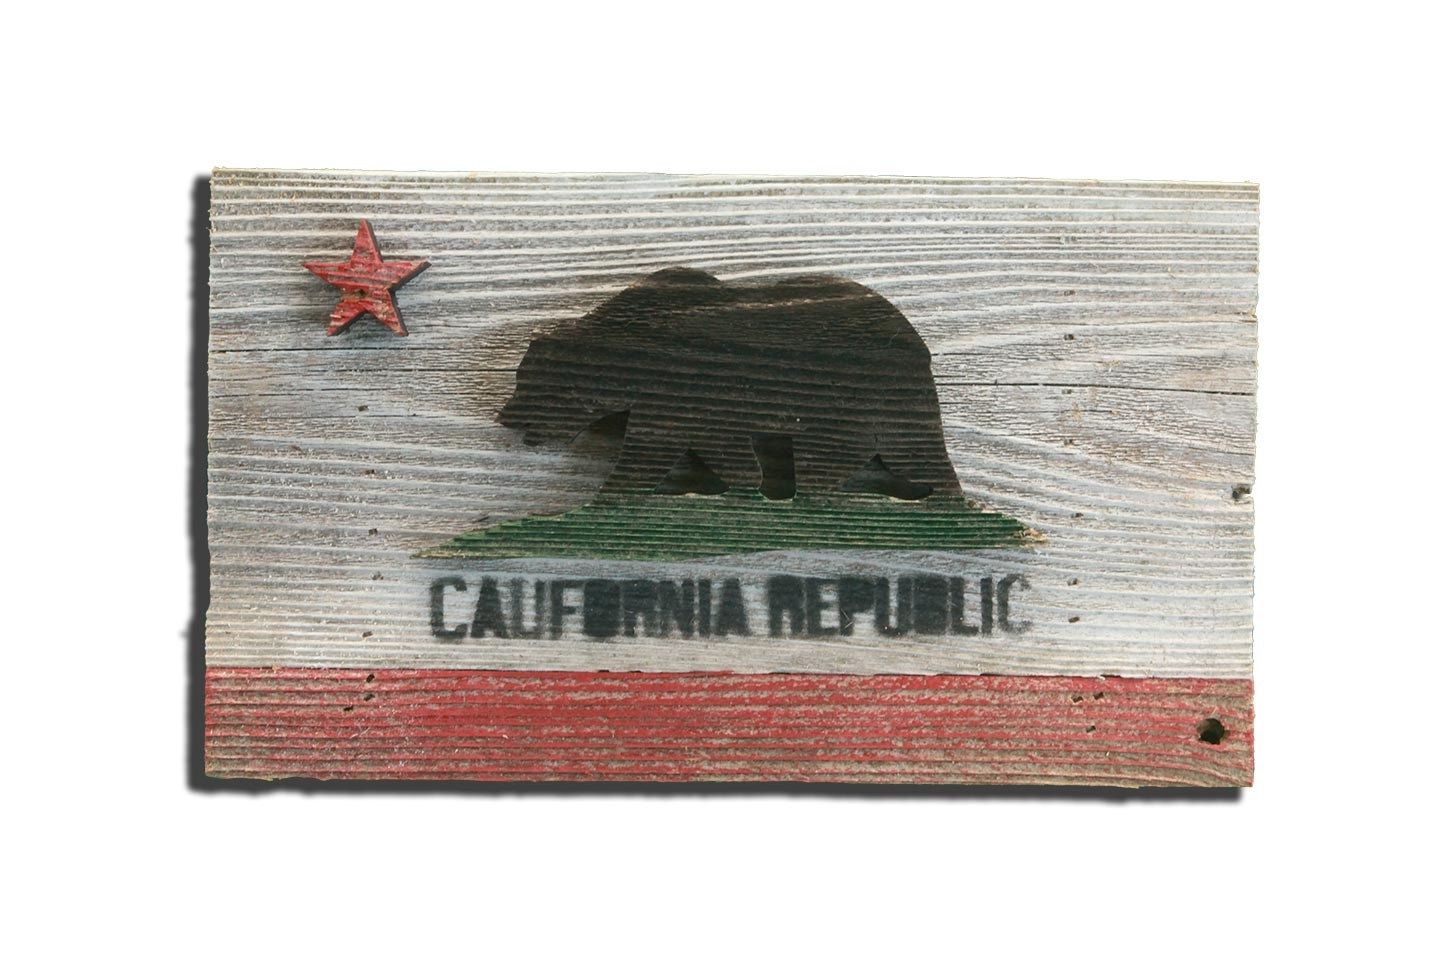 Handmade, Reclaimed Wooden California Flag, Vintage, Art, Distressed Inside Most Recently Released California Wall Art (View 17 of 20)